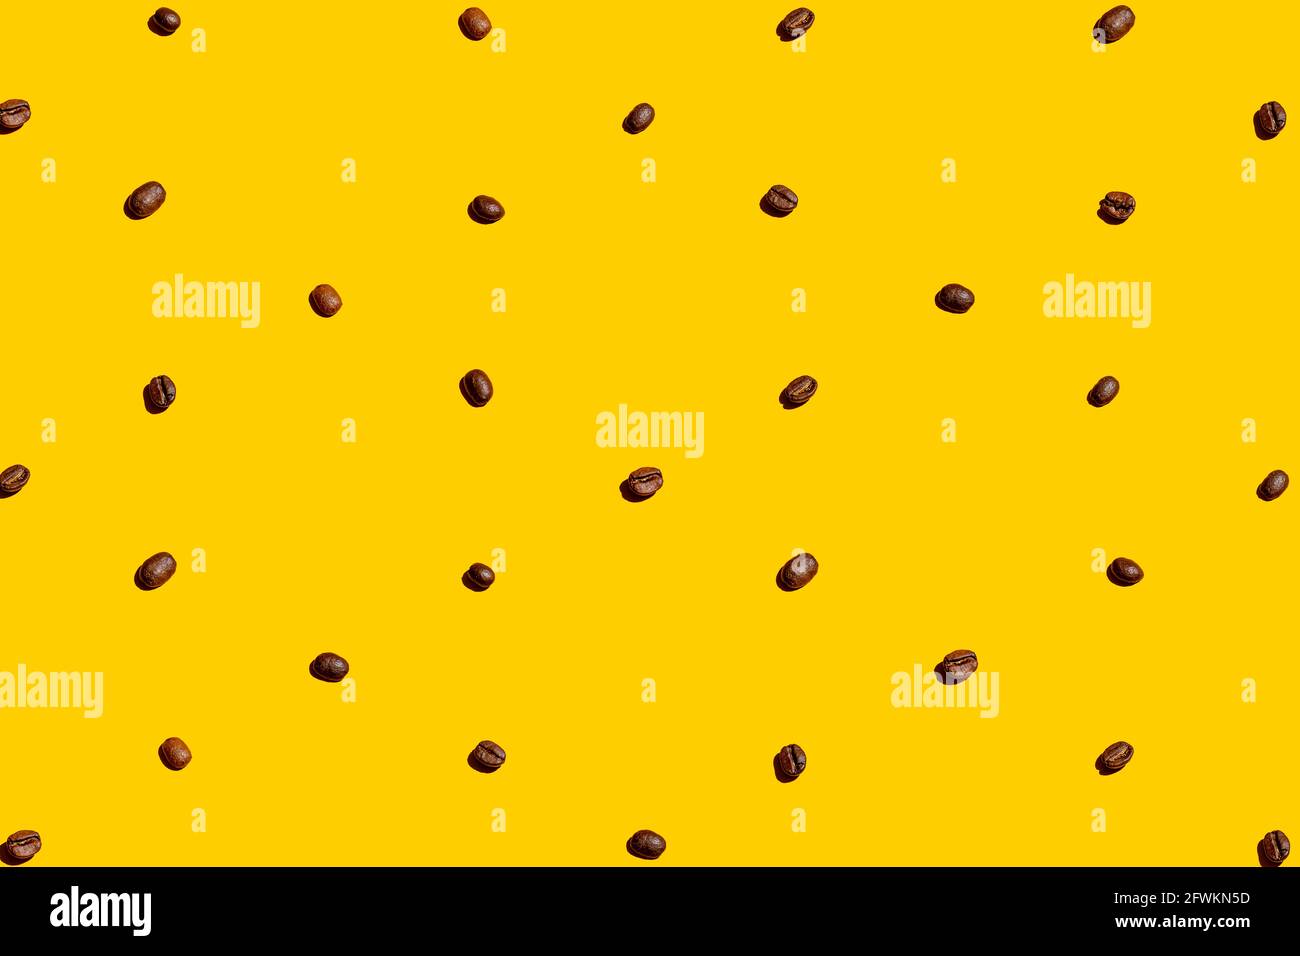 Coffee beans organized and forming a texture over yellow background. Stock Photo